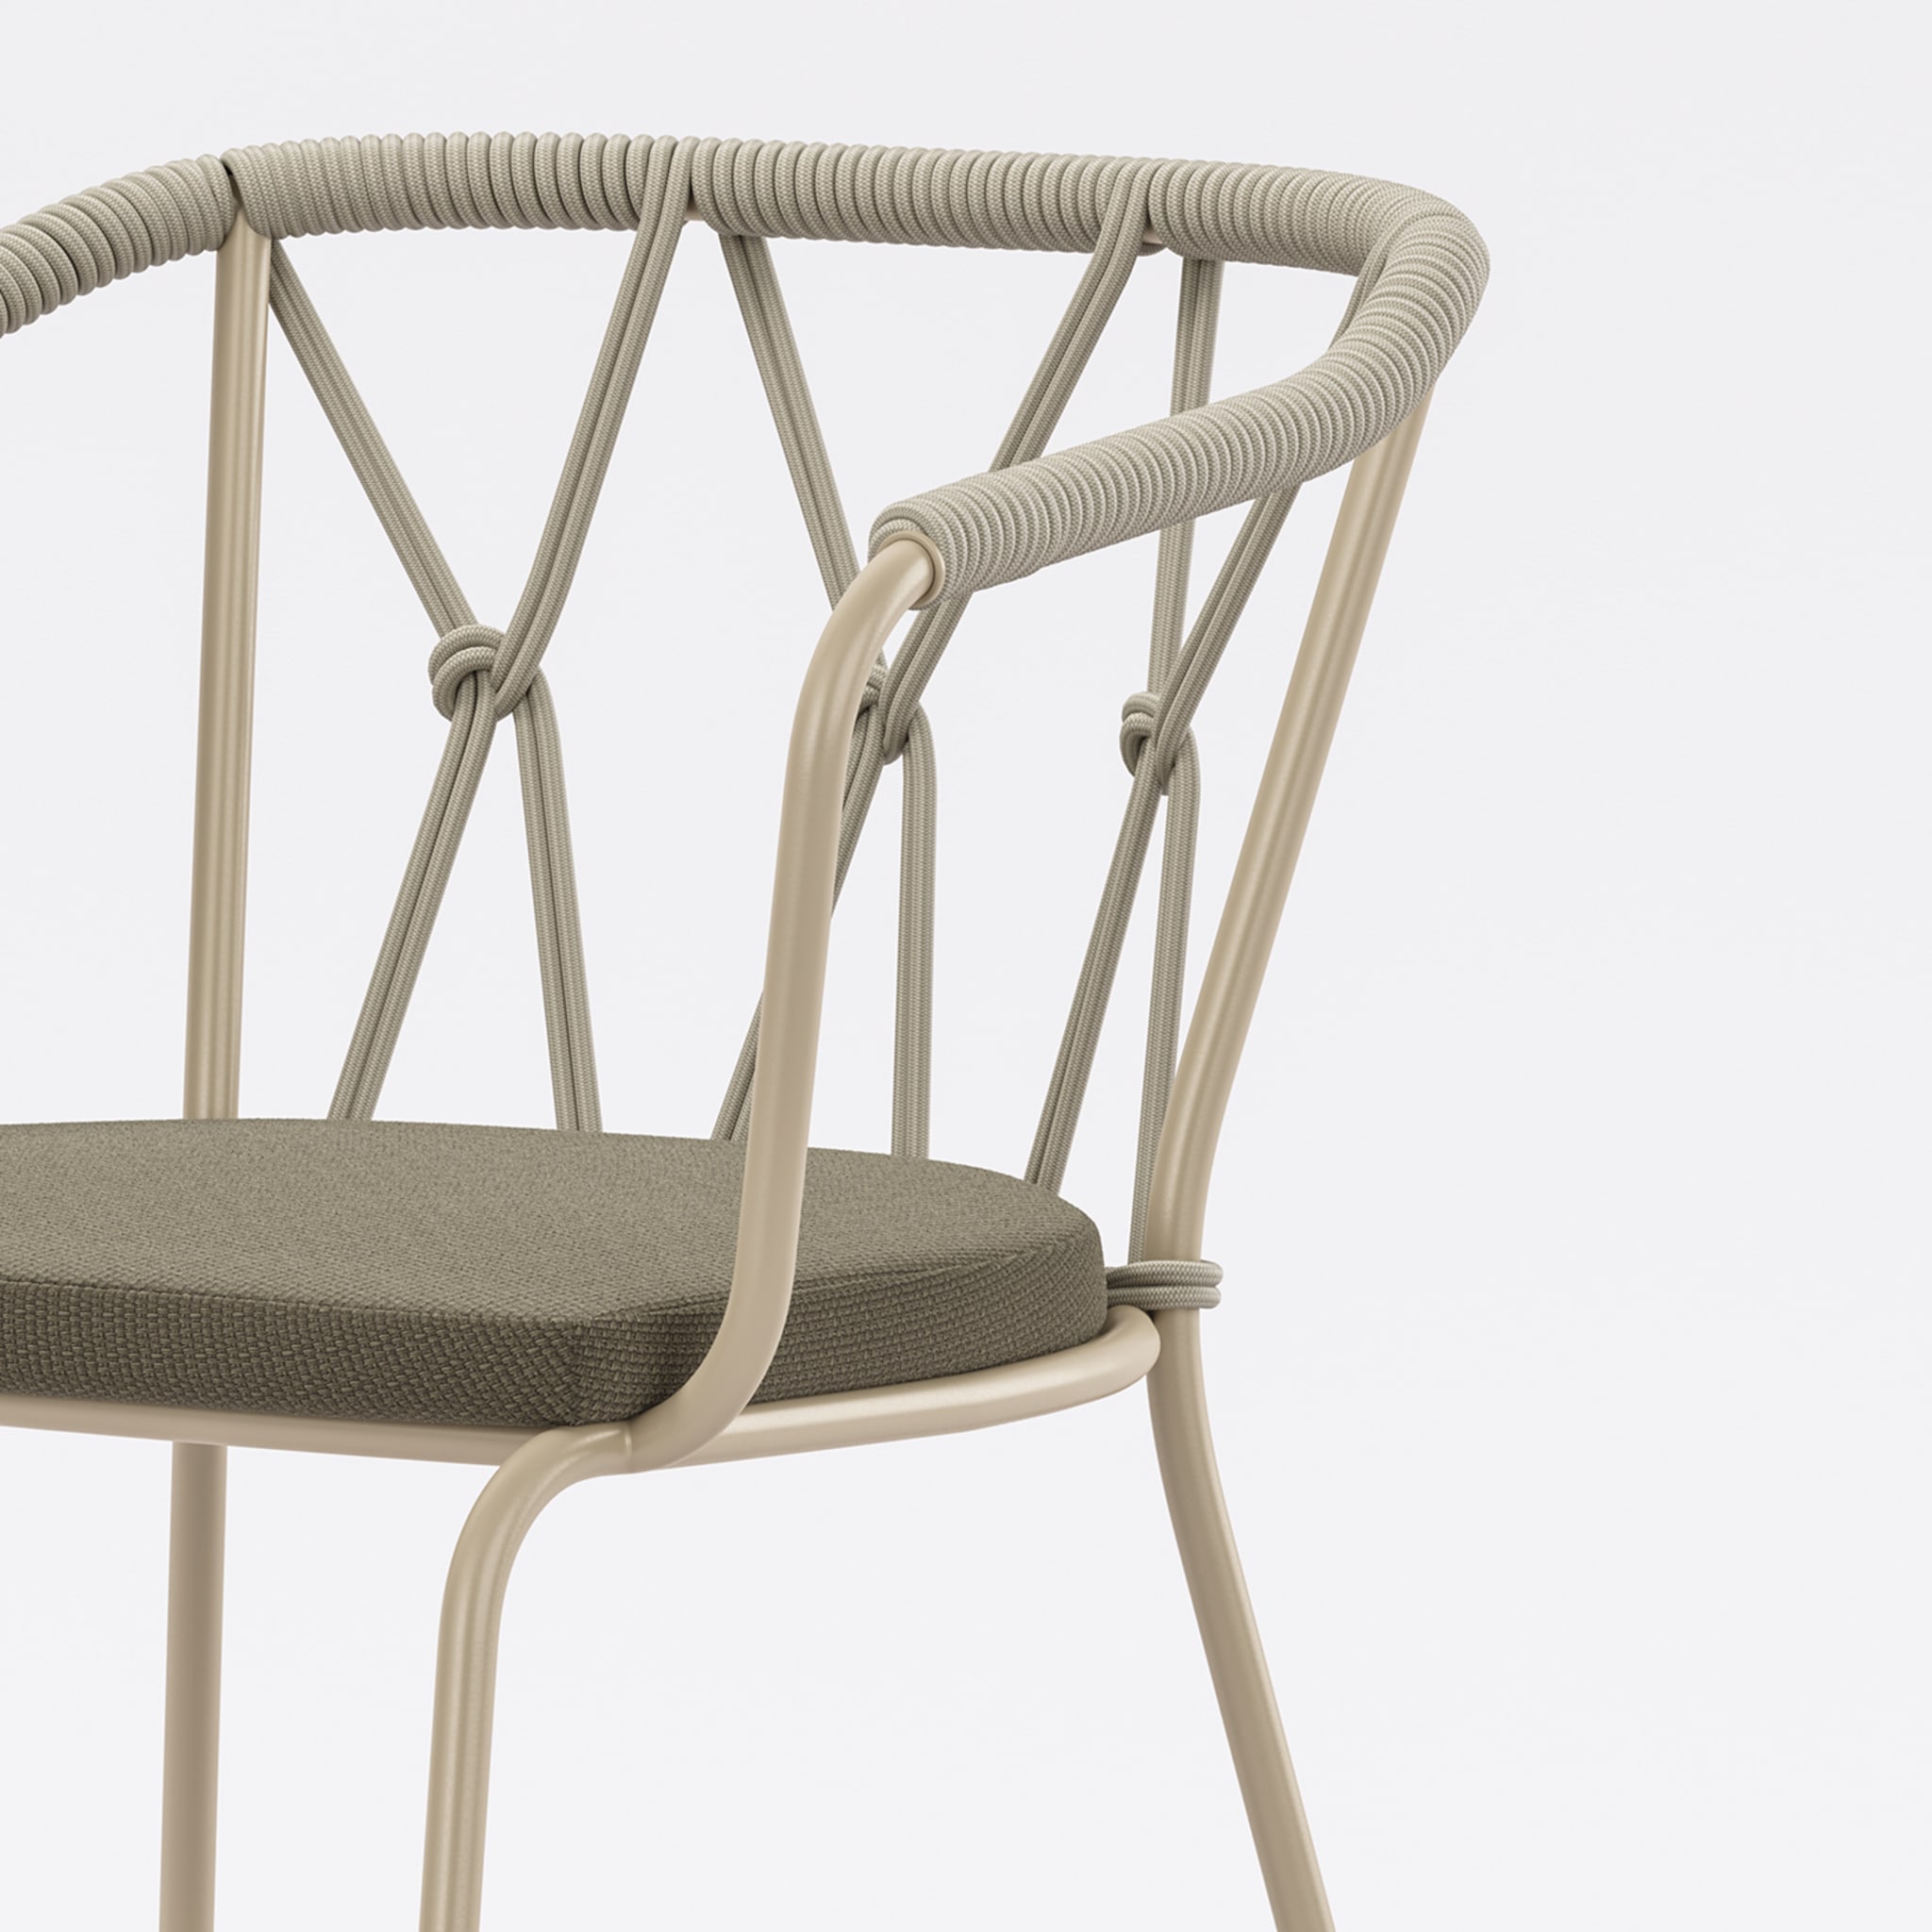 Scala Small Beige Outdoor Chair by Marco Piva - Alternative view 1